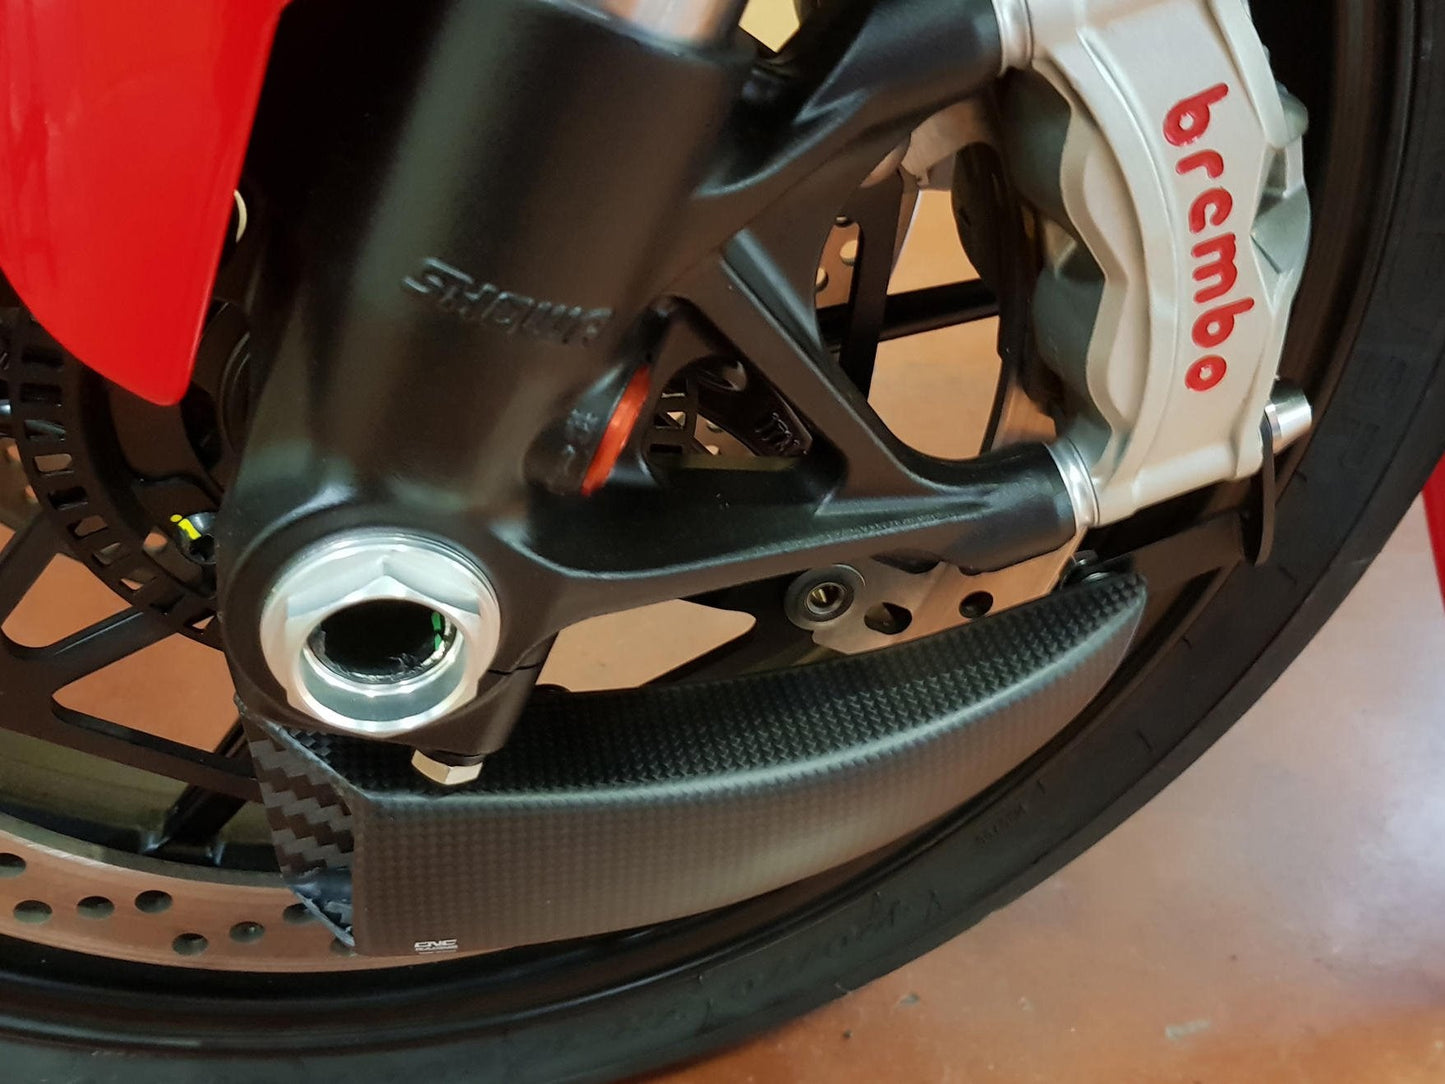 ZA701 - CNC RACING Ducati Superbike 1098S Carbon Front Brake Cooling System "GP Ducts"